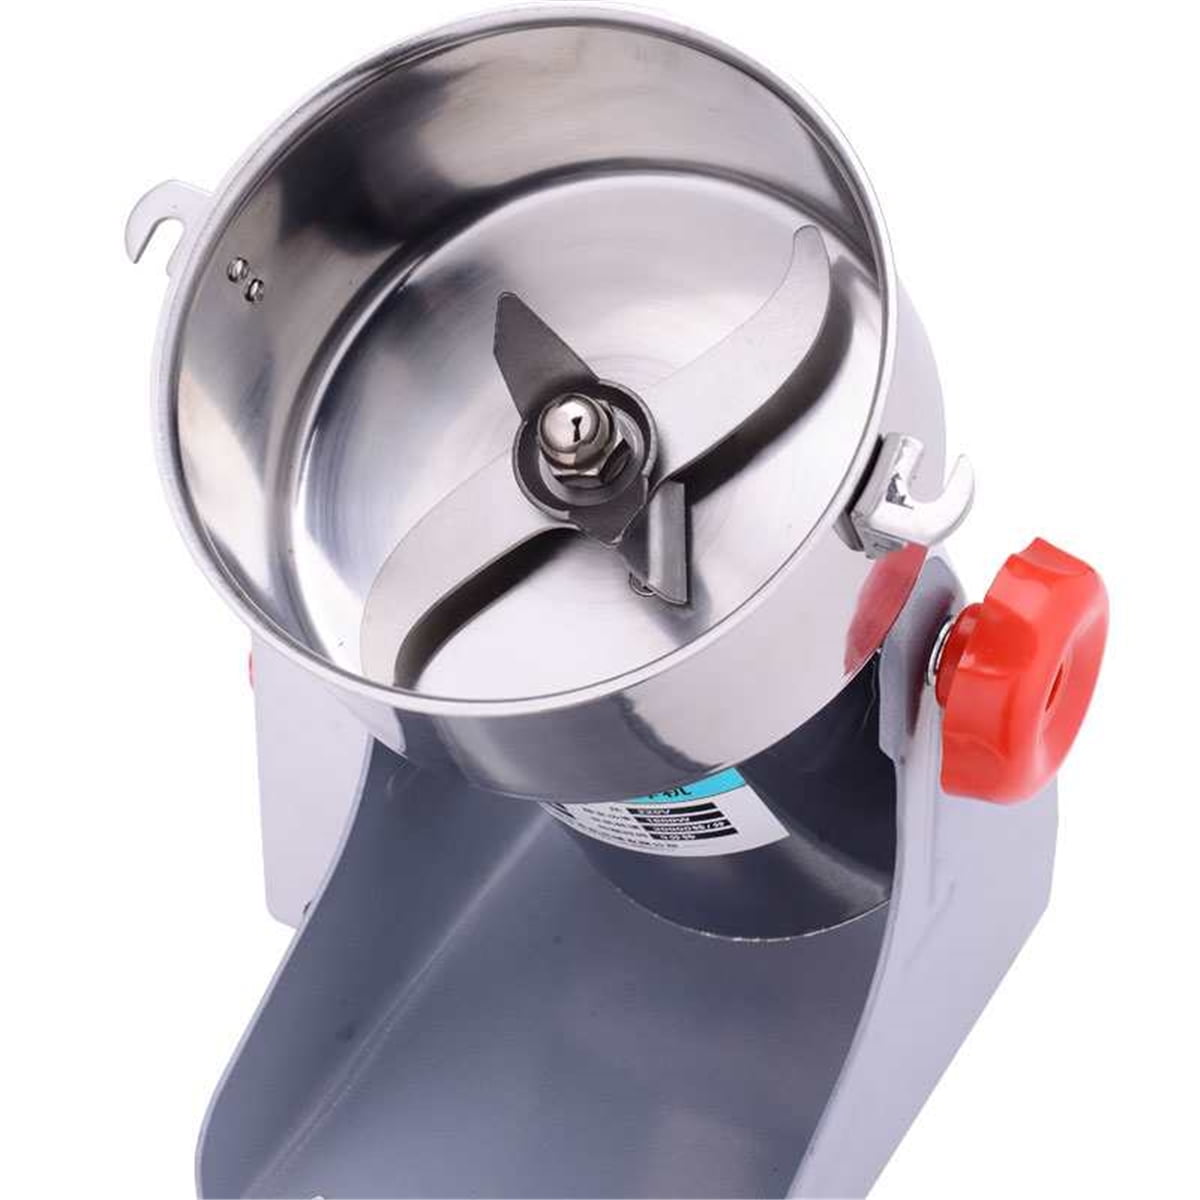 700G Dry Food Grinder Electric Grains Spices Hebals Cereal Mill Grinding